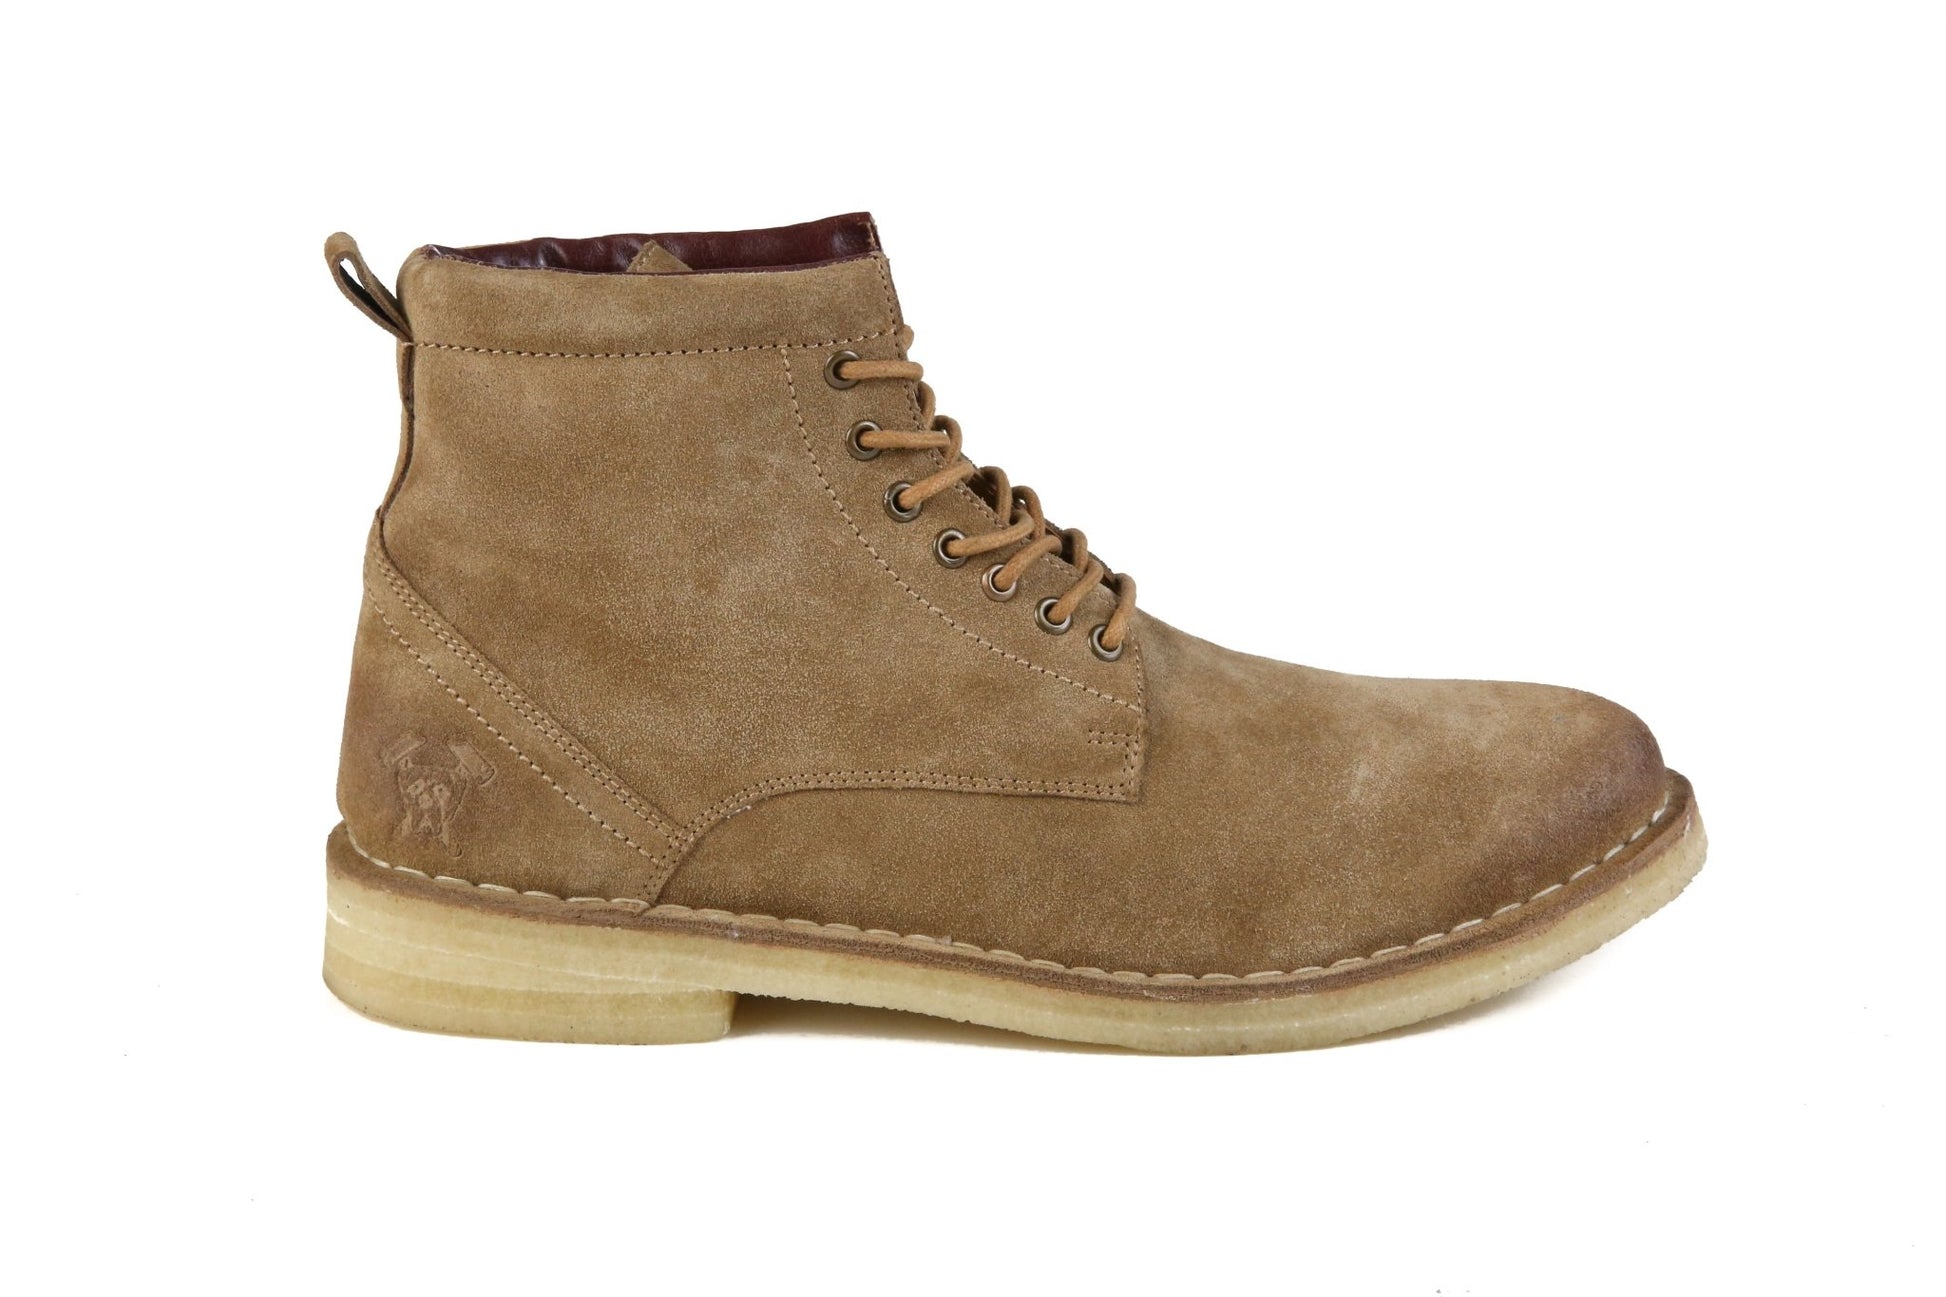 Hound & Hammer "The Hunter" Men's Sand Leather Urban Hiking Boots - Men - Footwear - Boots - Ankle Boots - Benn~Burry